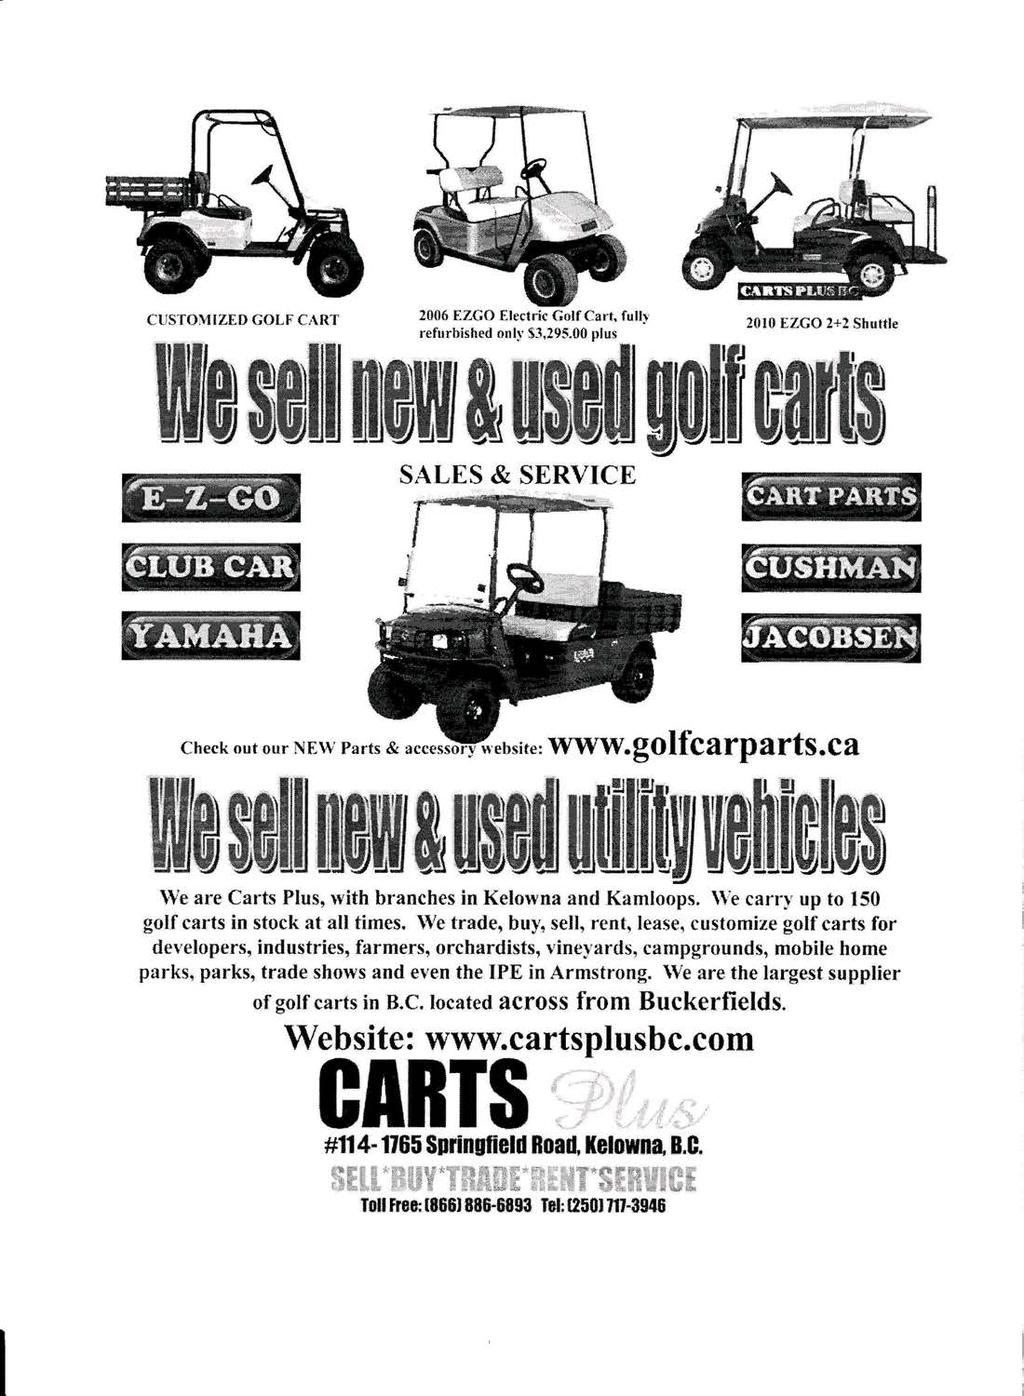 CUSTOMIZED GOLF CART 2006 EZGO Electlic Golf Cart, fully refurhished only $3,295.00 plus 2010 EZGO 2+2 Shuttle SALES & SERVICE Check out our NEW Parts & accessory website: www.golfcarparts.